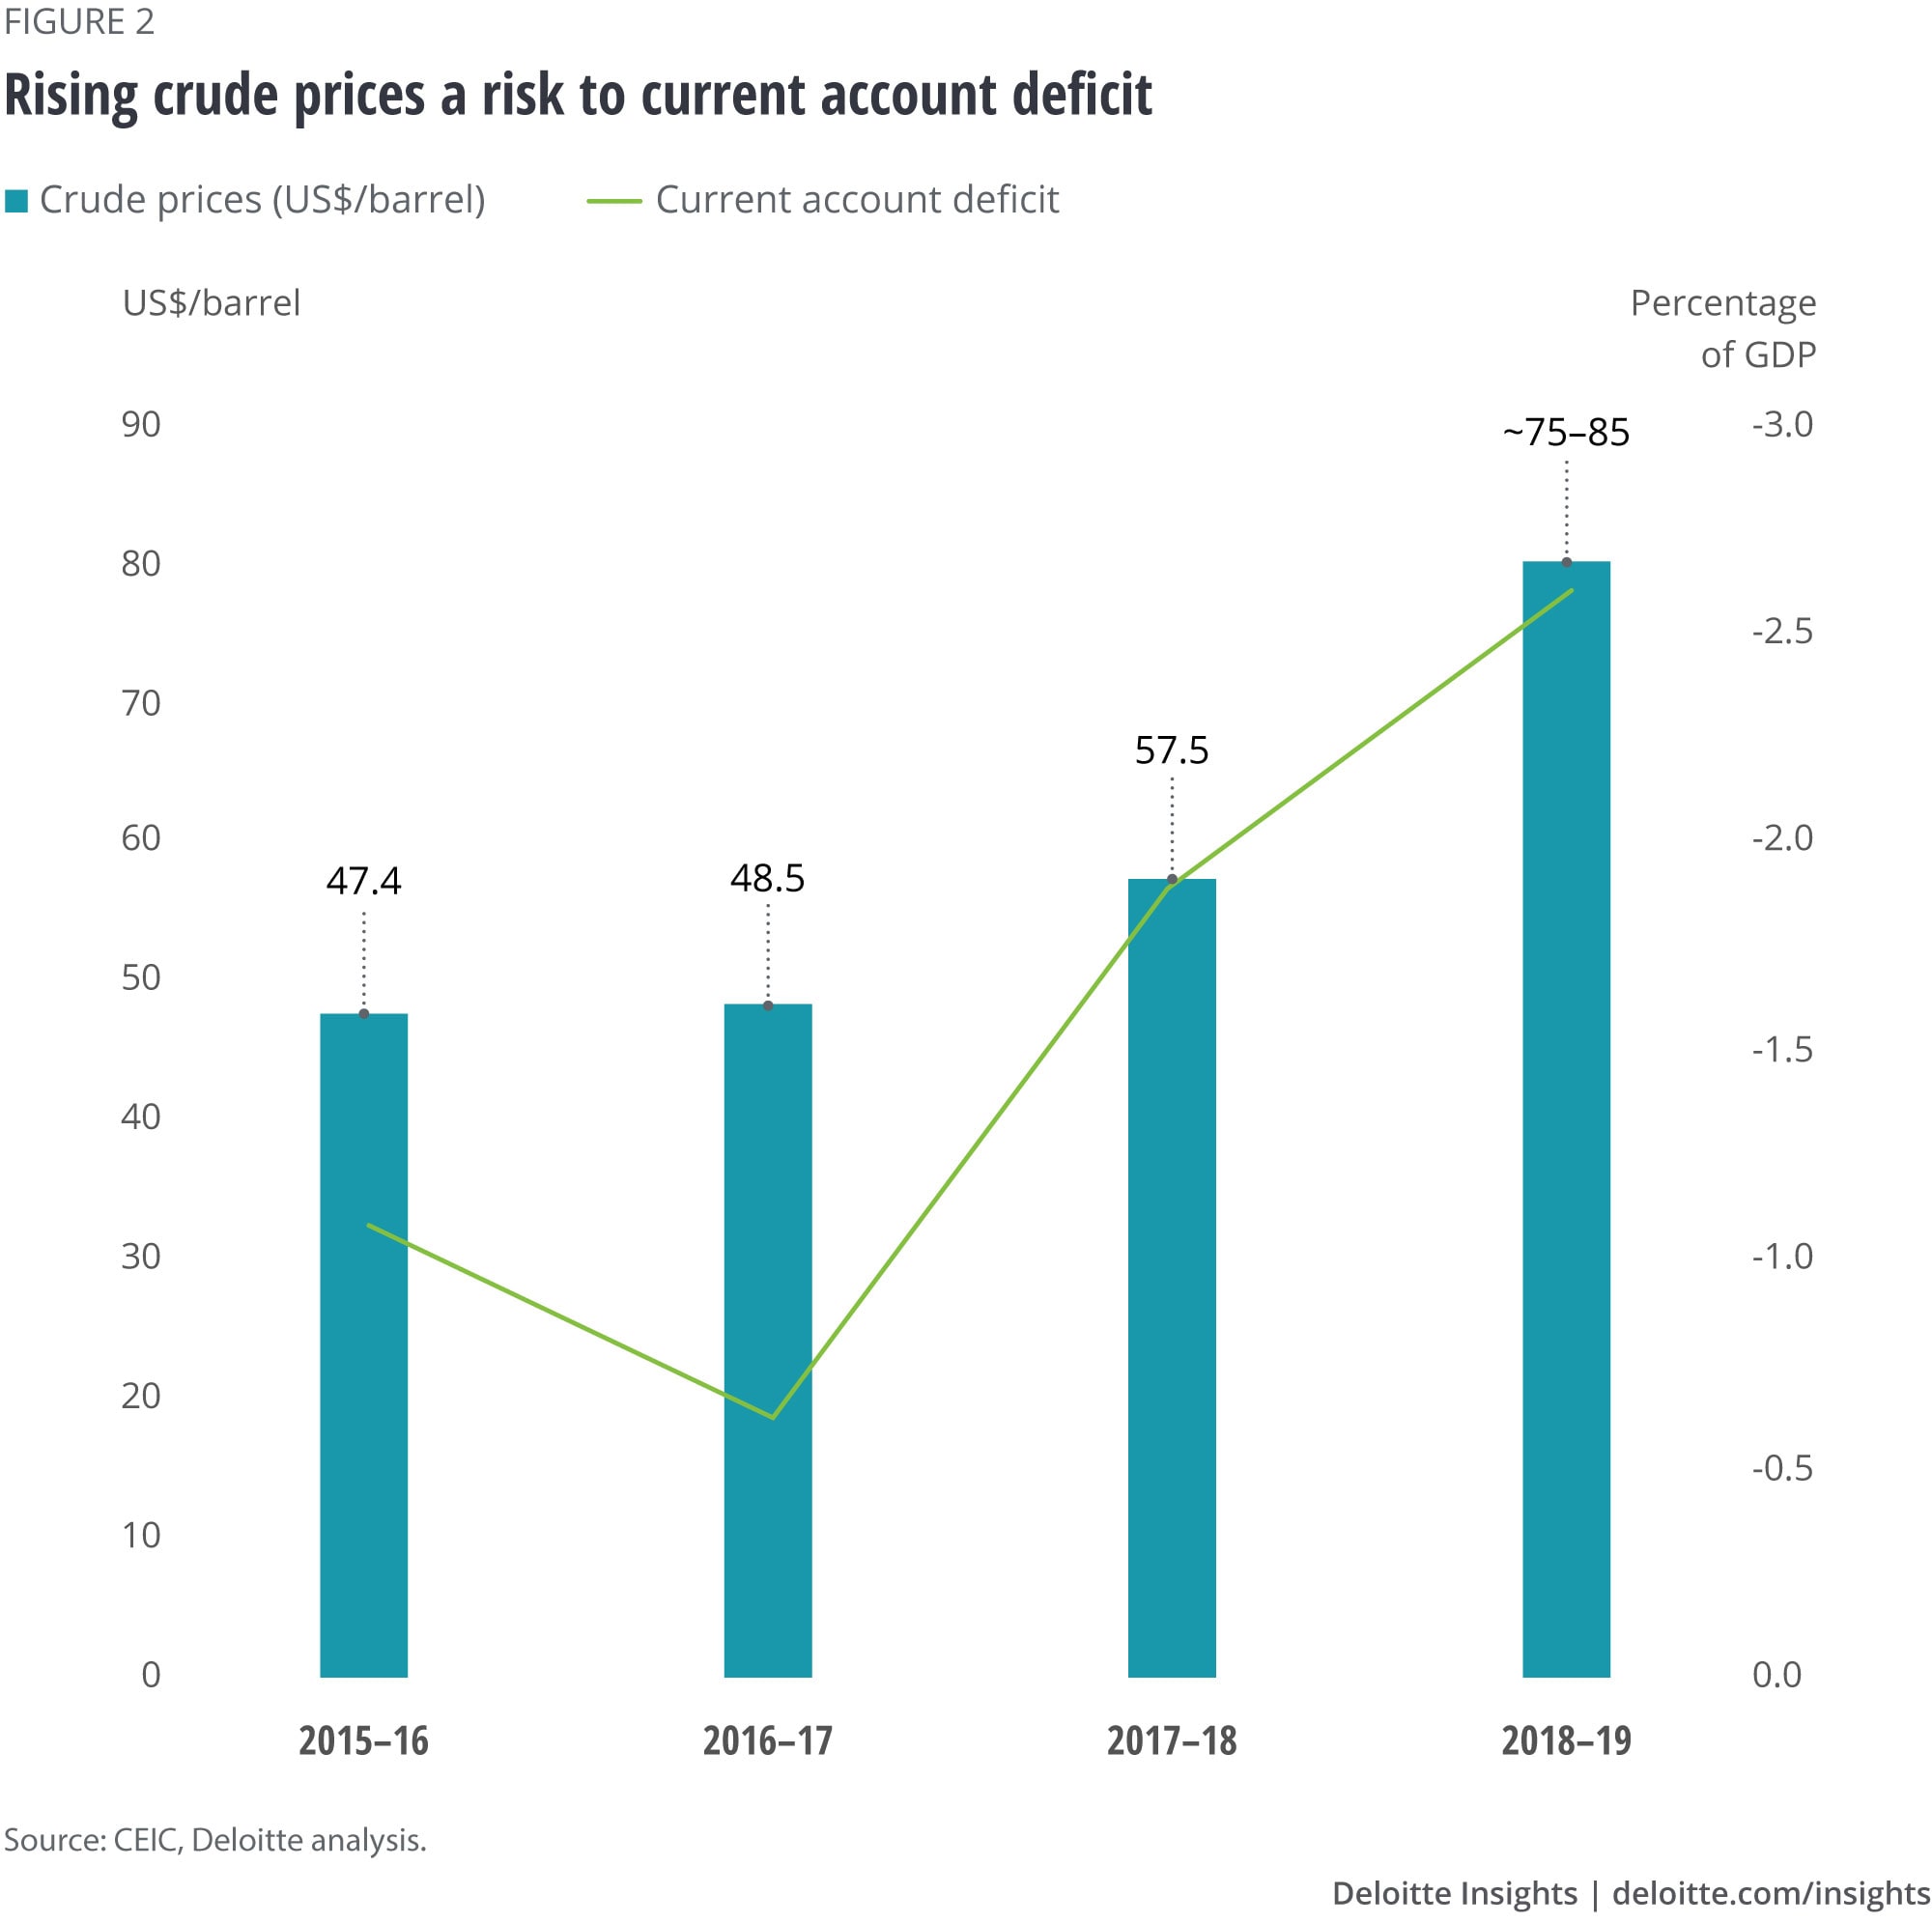 Rising crude prices a risk to current account deficit